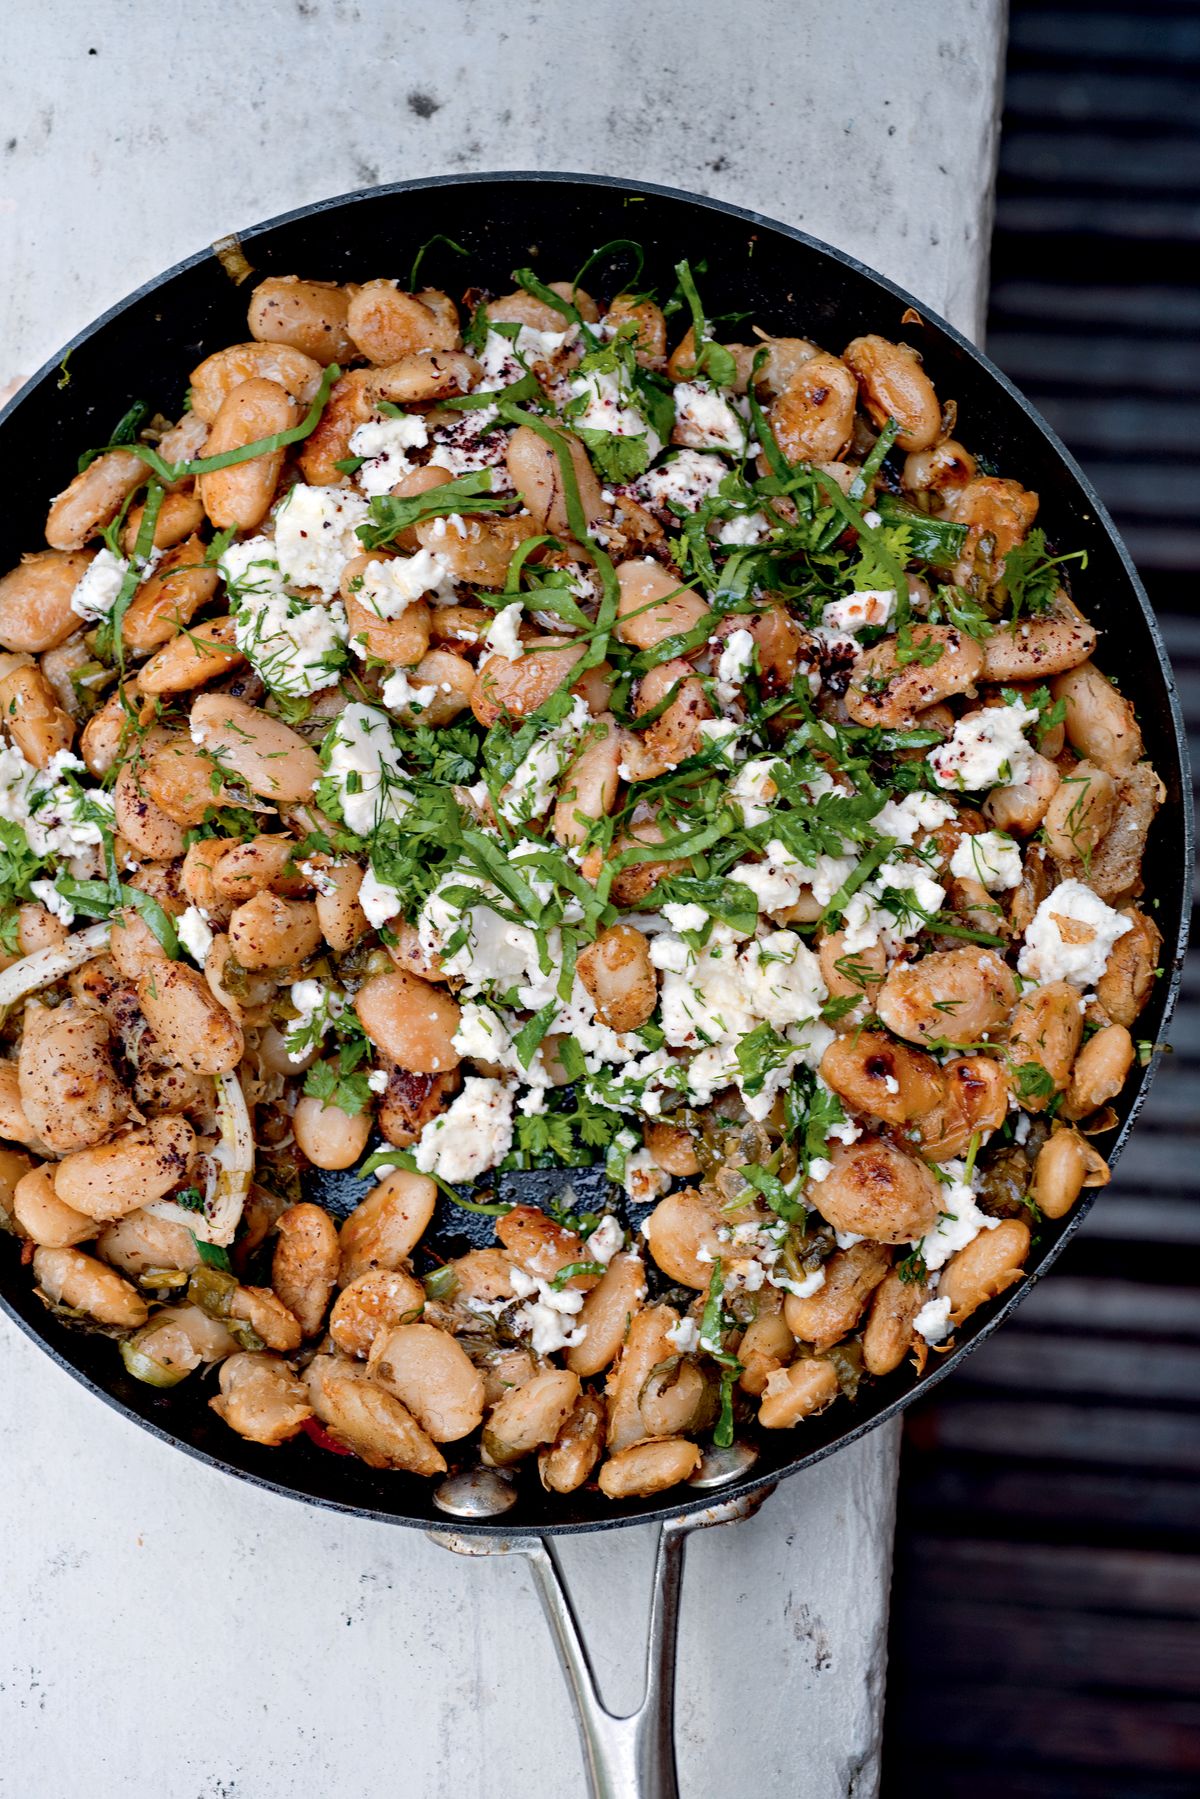 Yotam Ottolenghi’s Fried Butterbeans with Feta, Sorrel and Sumac